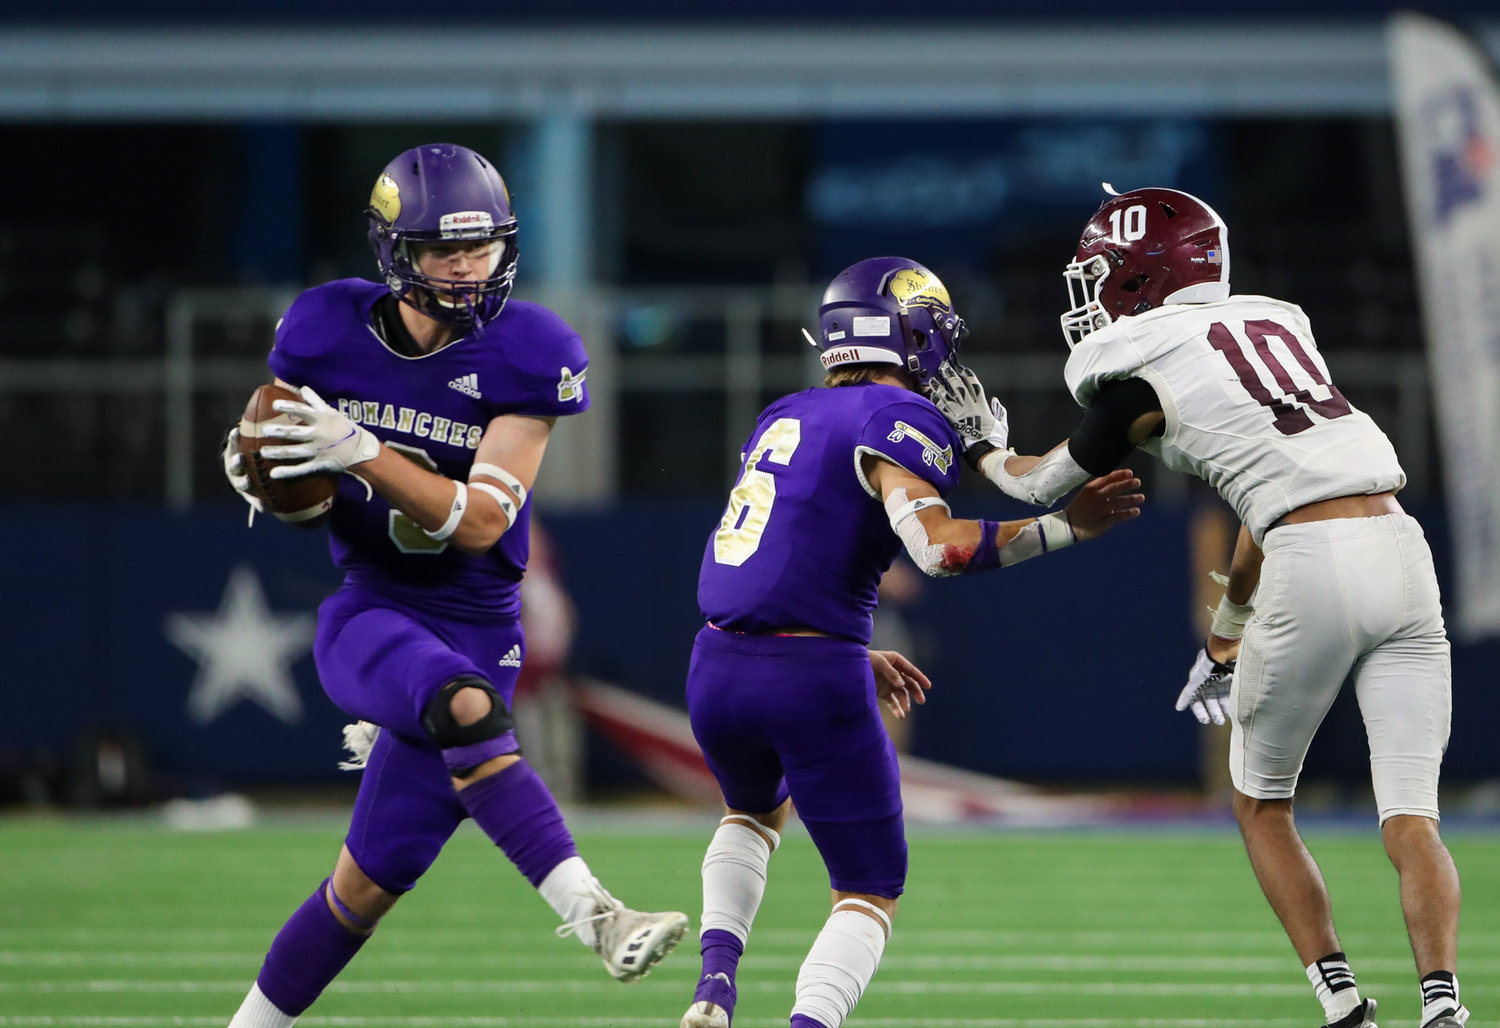 Shiner Comanches senior Eli Fric (8) intercepts a pass during the Class 2A Division I state football championship game between Shiner and Hawley on December 15, 2021 in Arlington, Texas.